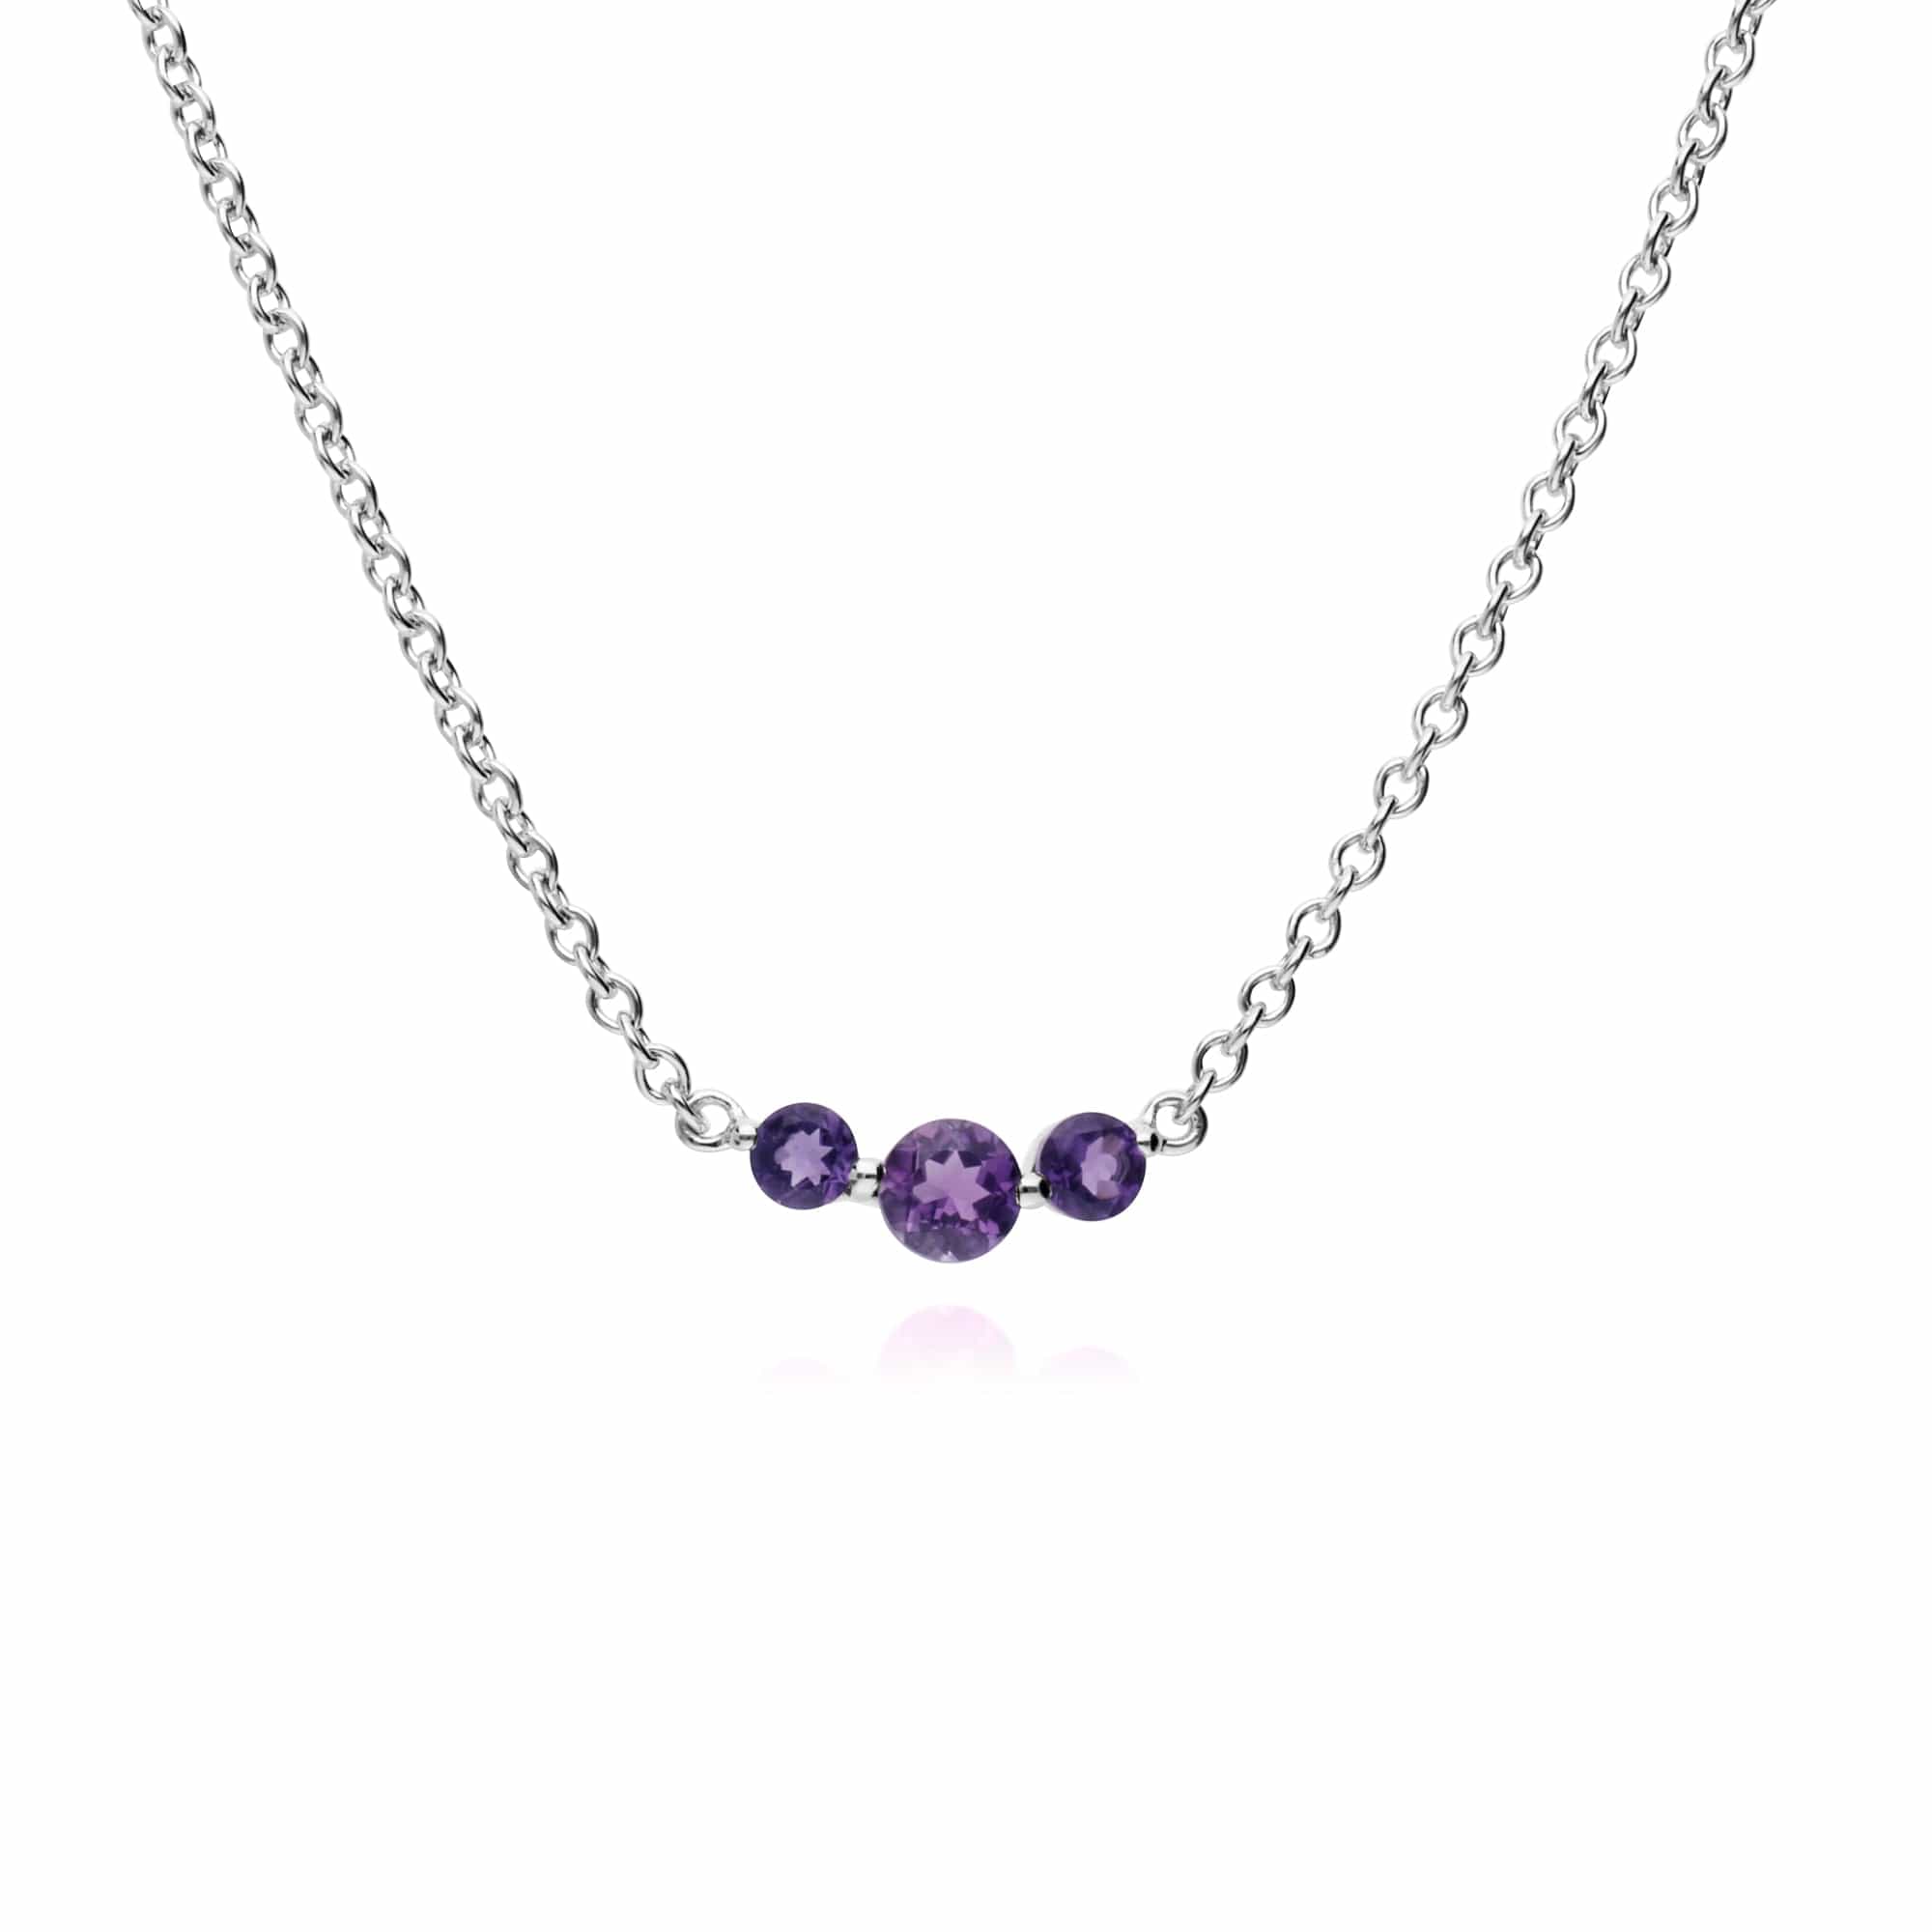 270N034203925-270L011103925 Classic Round Amethyst Three Stone Gradient Bracelet & Necklace Set in 925 Sterling Silver 3